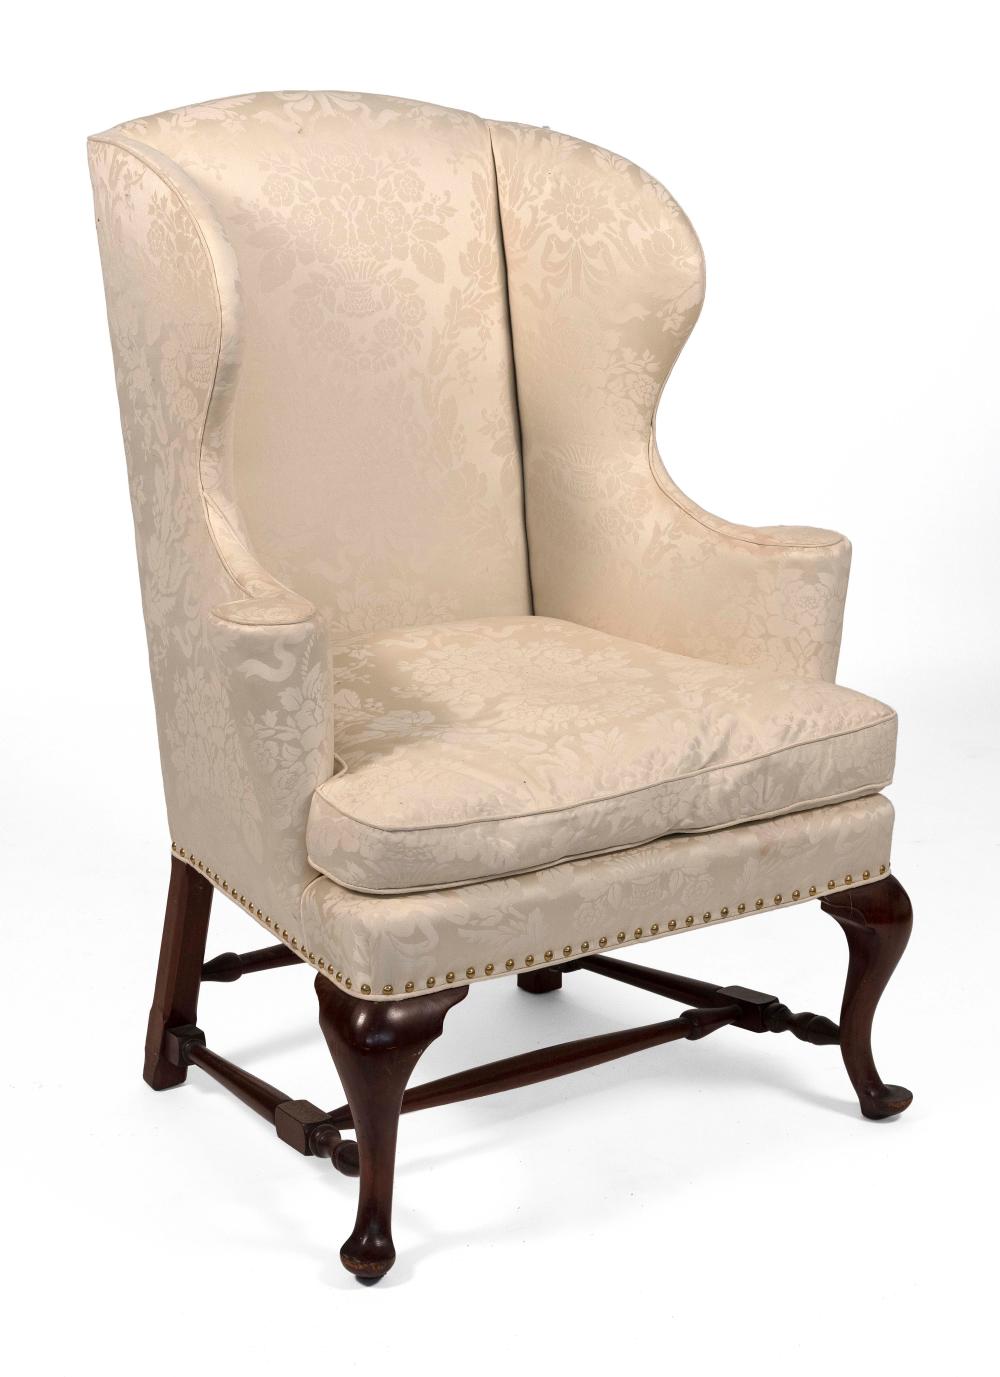 BOSTON QUEEN ANNE-STYLE WING CHAIR